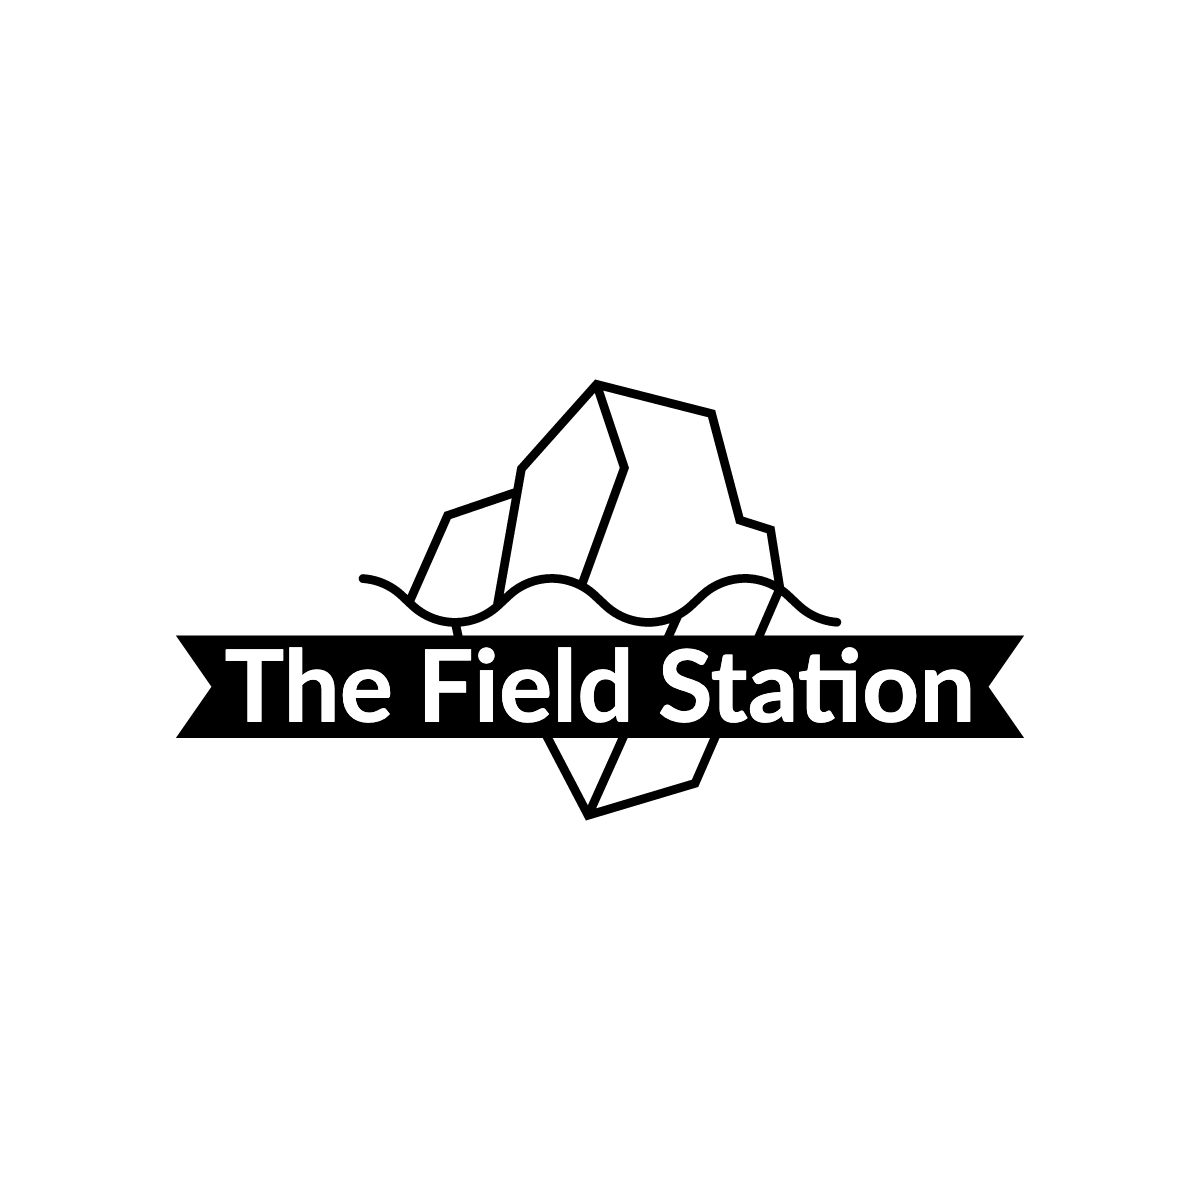 The Field Station